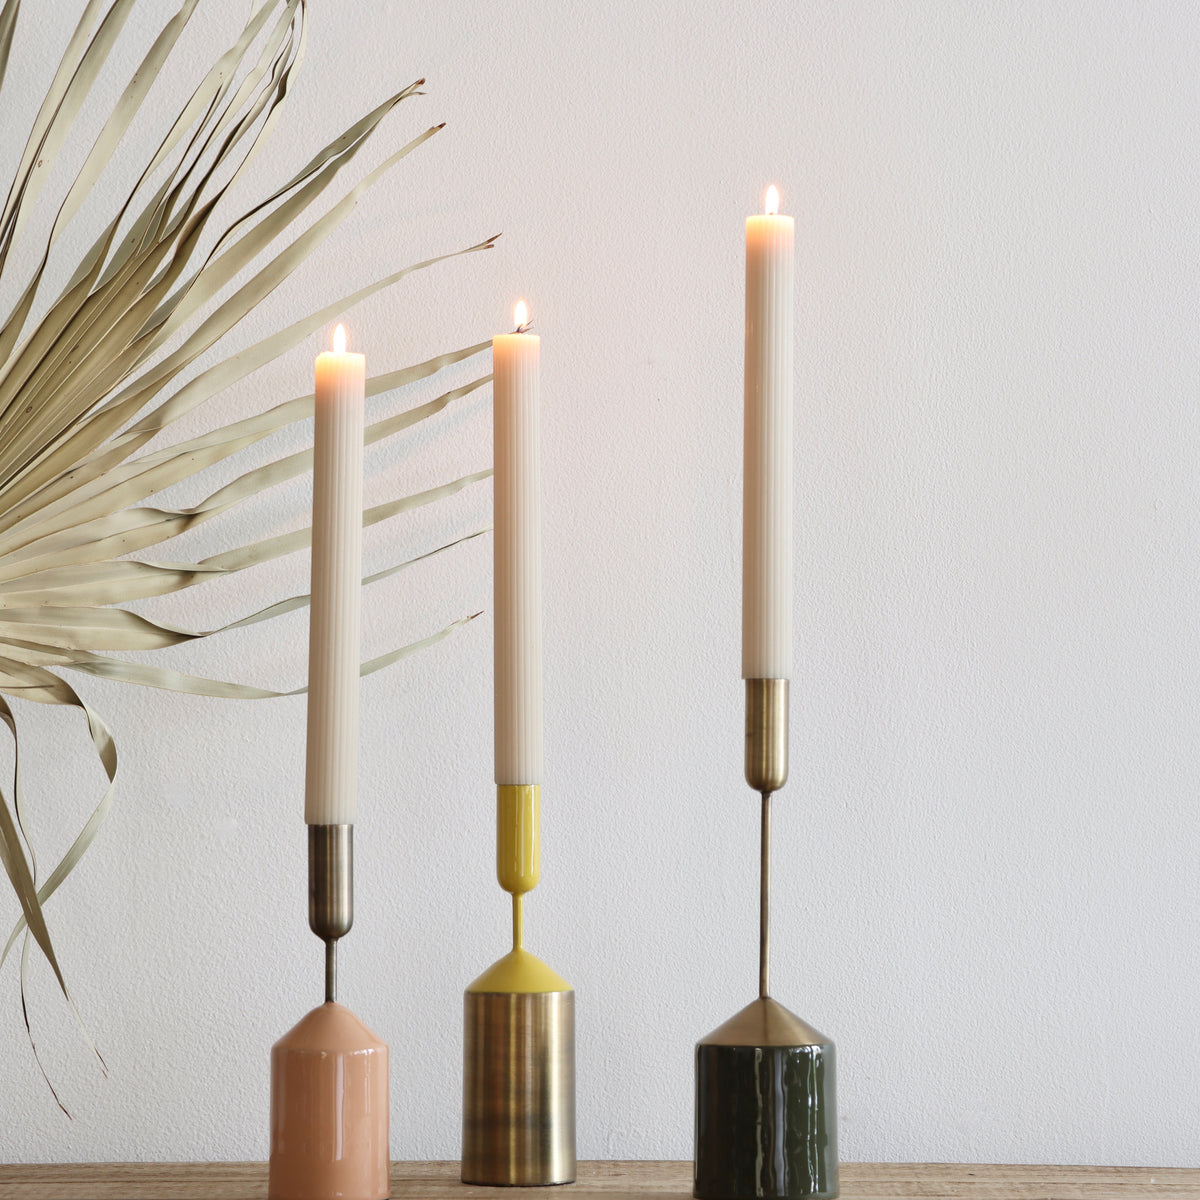 Enameled Taper Candle Holders - Set of 3